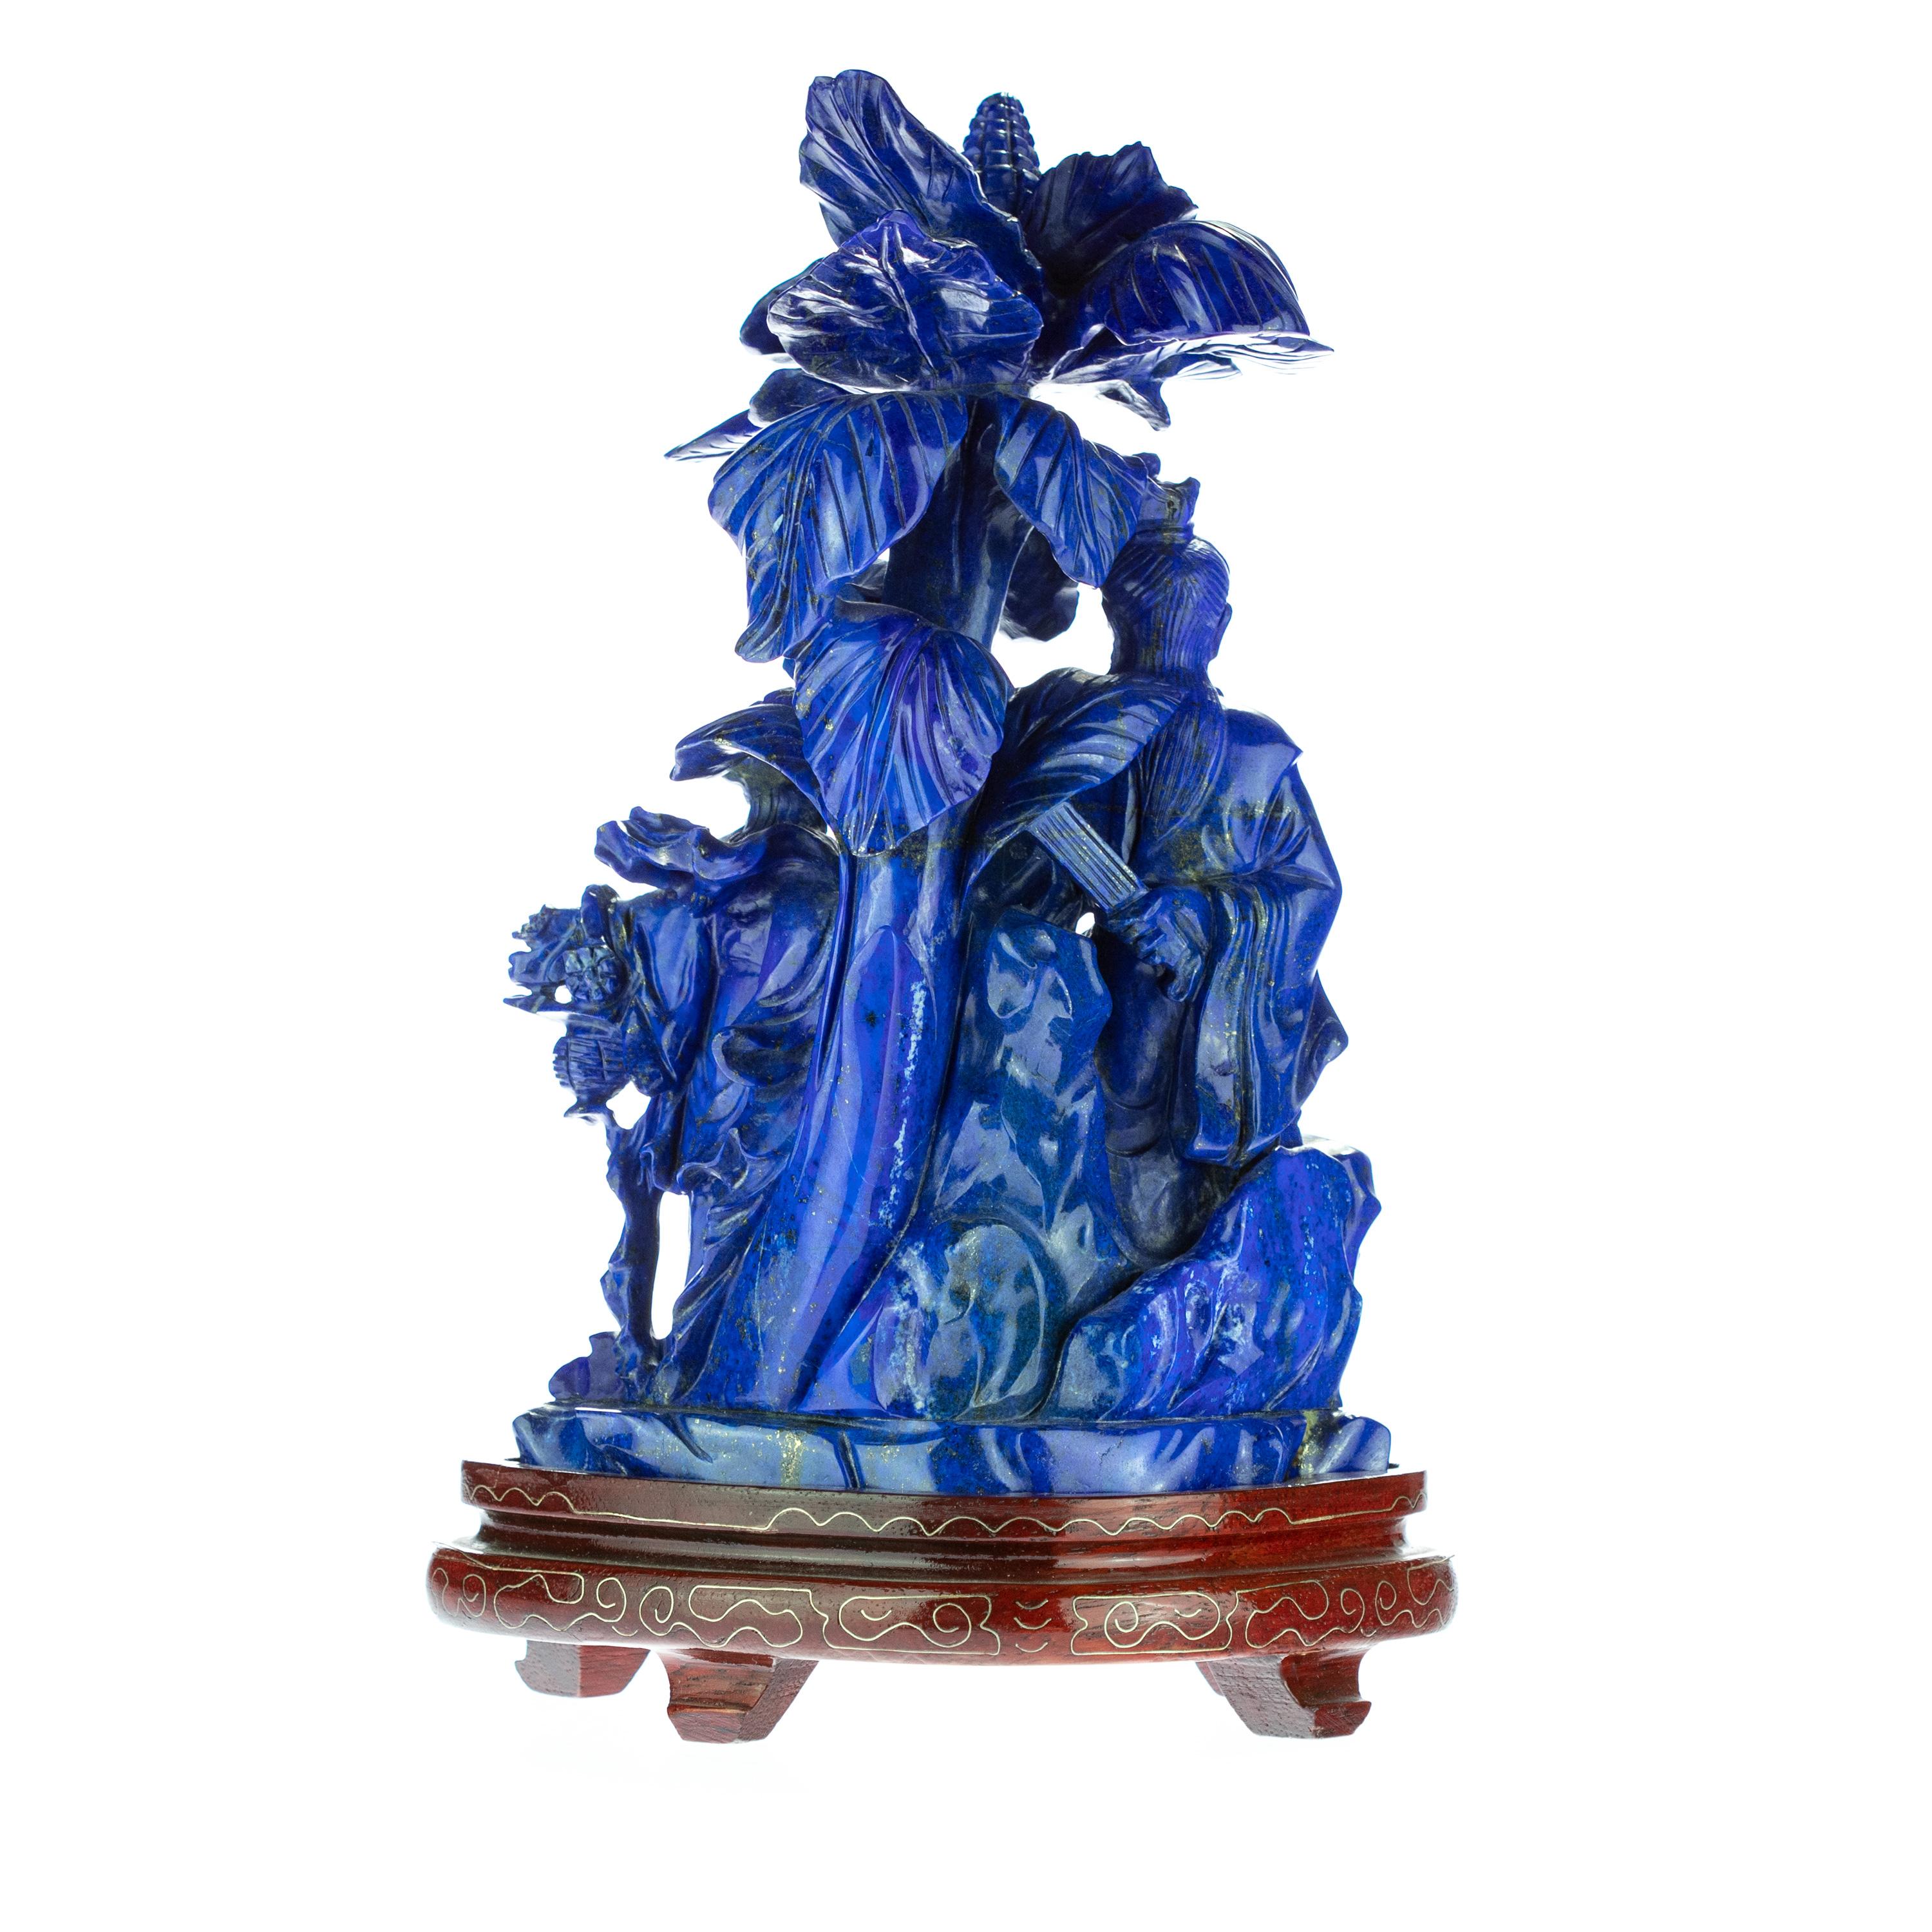 Chinese Export Lapis Lazuli Imperial Family Carved Flower Gemstone Asian Art Statue Sculpture For Sale